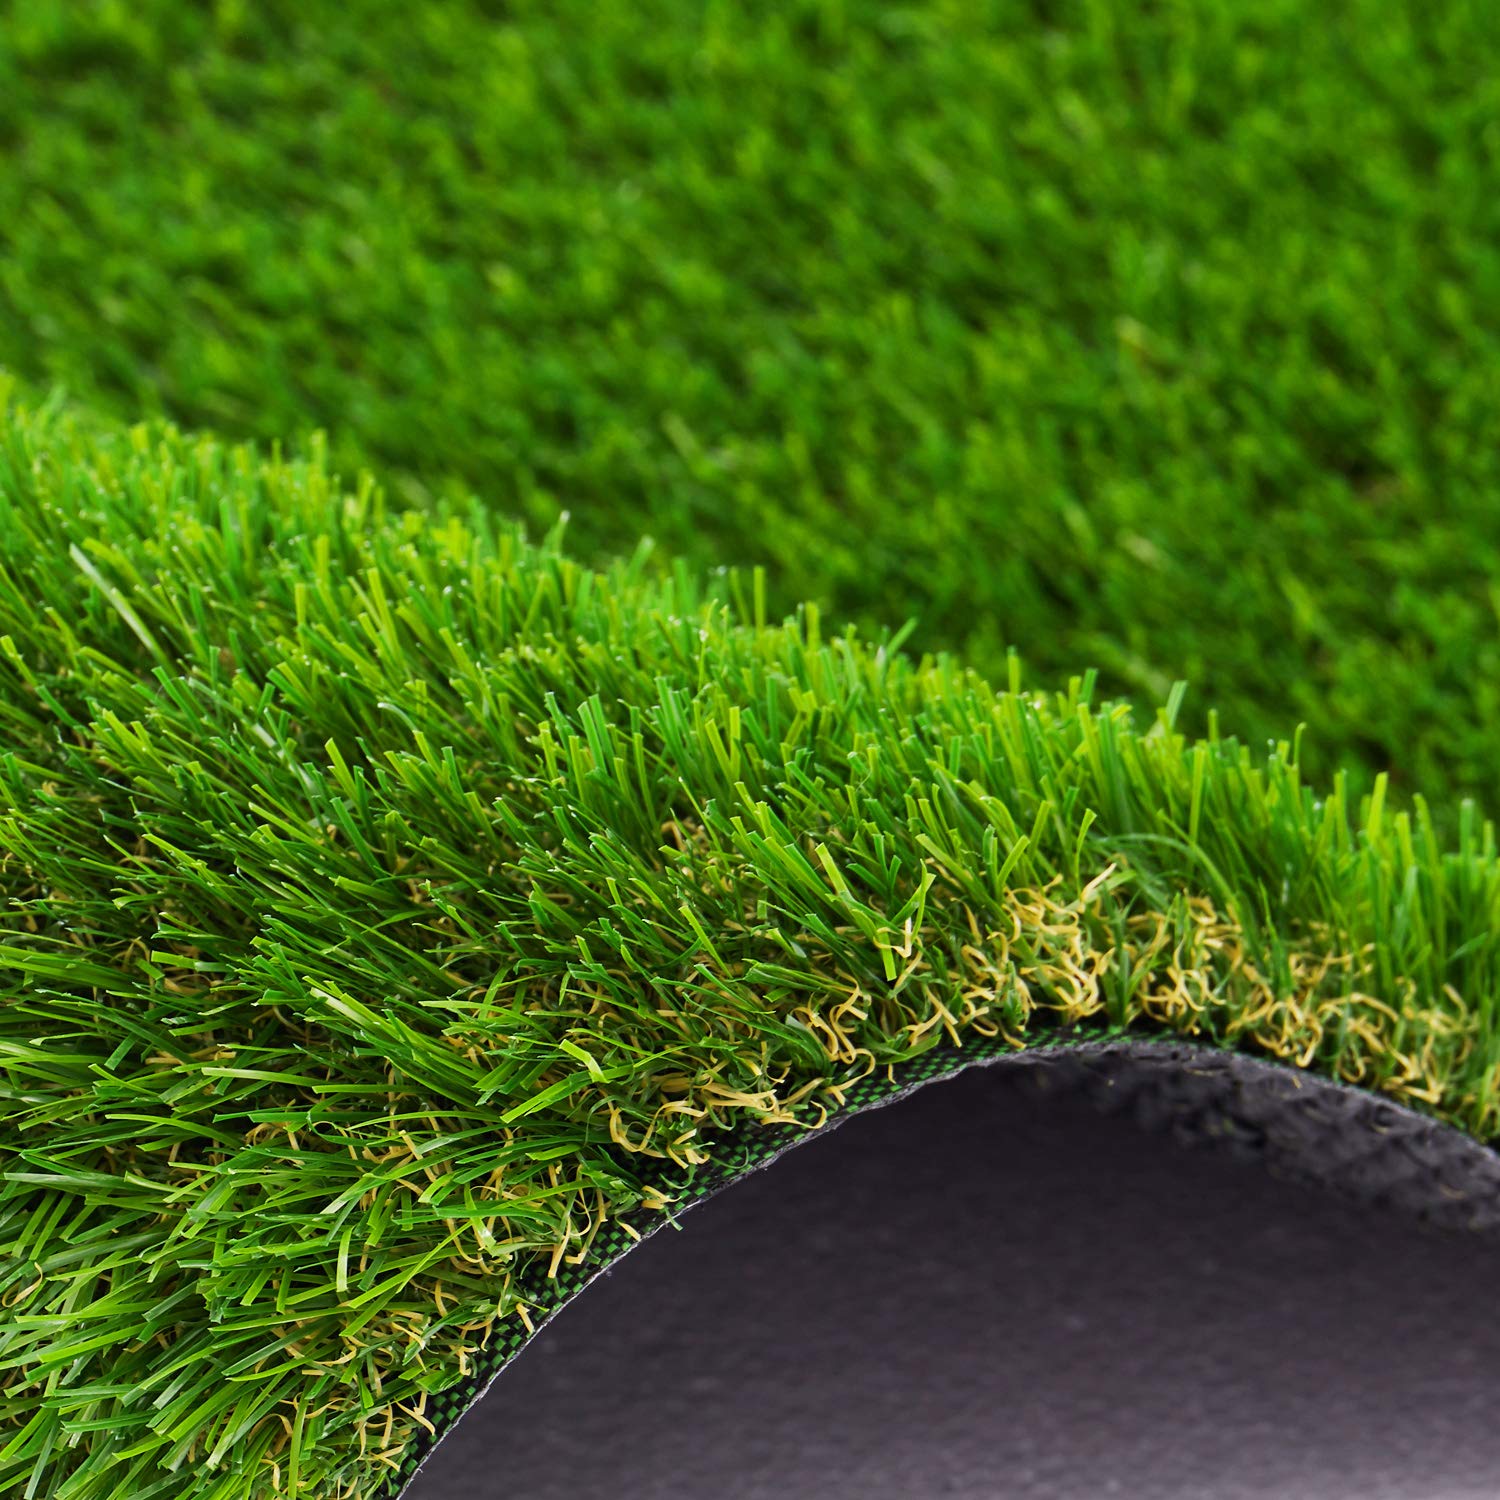 How to Choose Artificial Grass